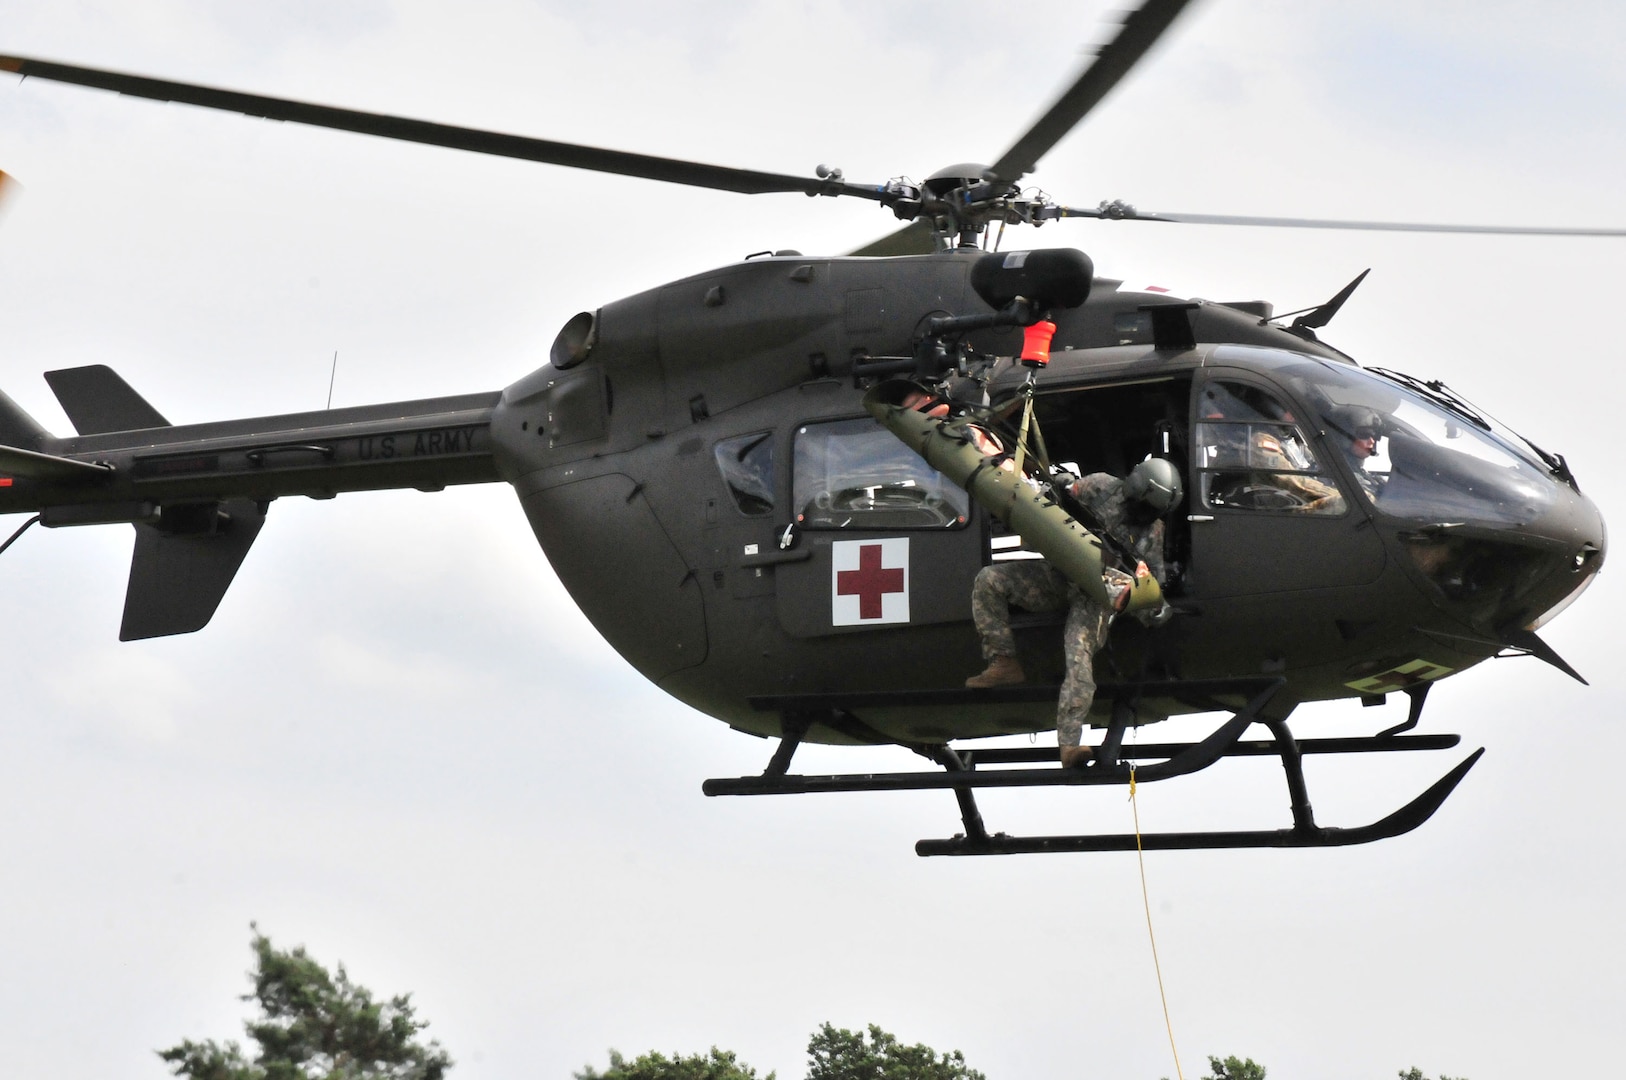 Nebraska and Iowa National Guard Soldiers assigned to 1st Squadron, 376th Aviation Battalion conduct a hoist and lift demonstration from their UH72-A Lakota June 21, 2018, at Grafenwoehr Training Area, Germany. The units are part of a four-month rotational deployment to Germany where they will assume the real world MEDEVAC mission for Hohenfels and Grafenwoehr from their active duty unit counterparts.